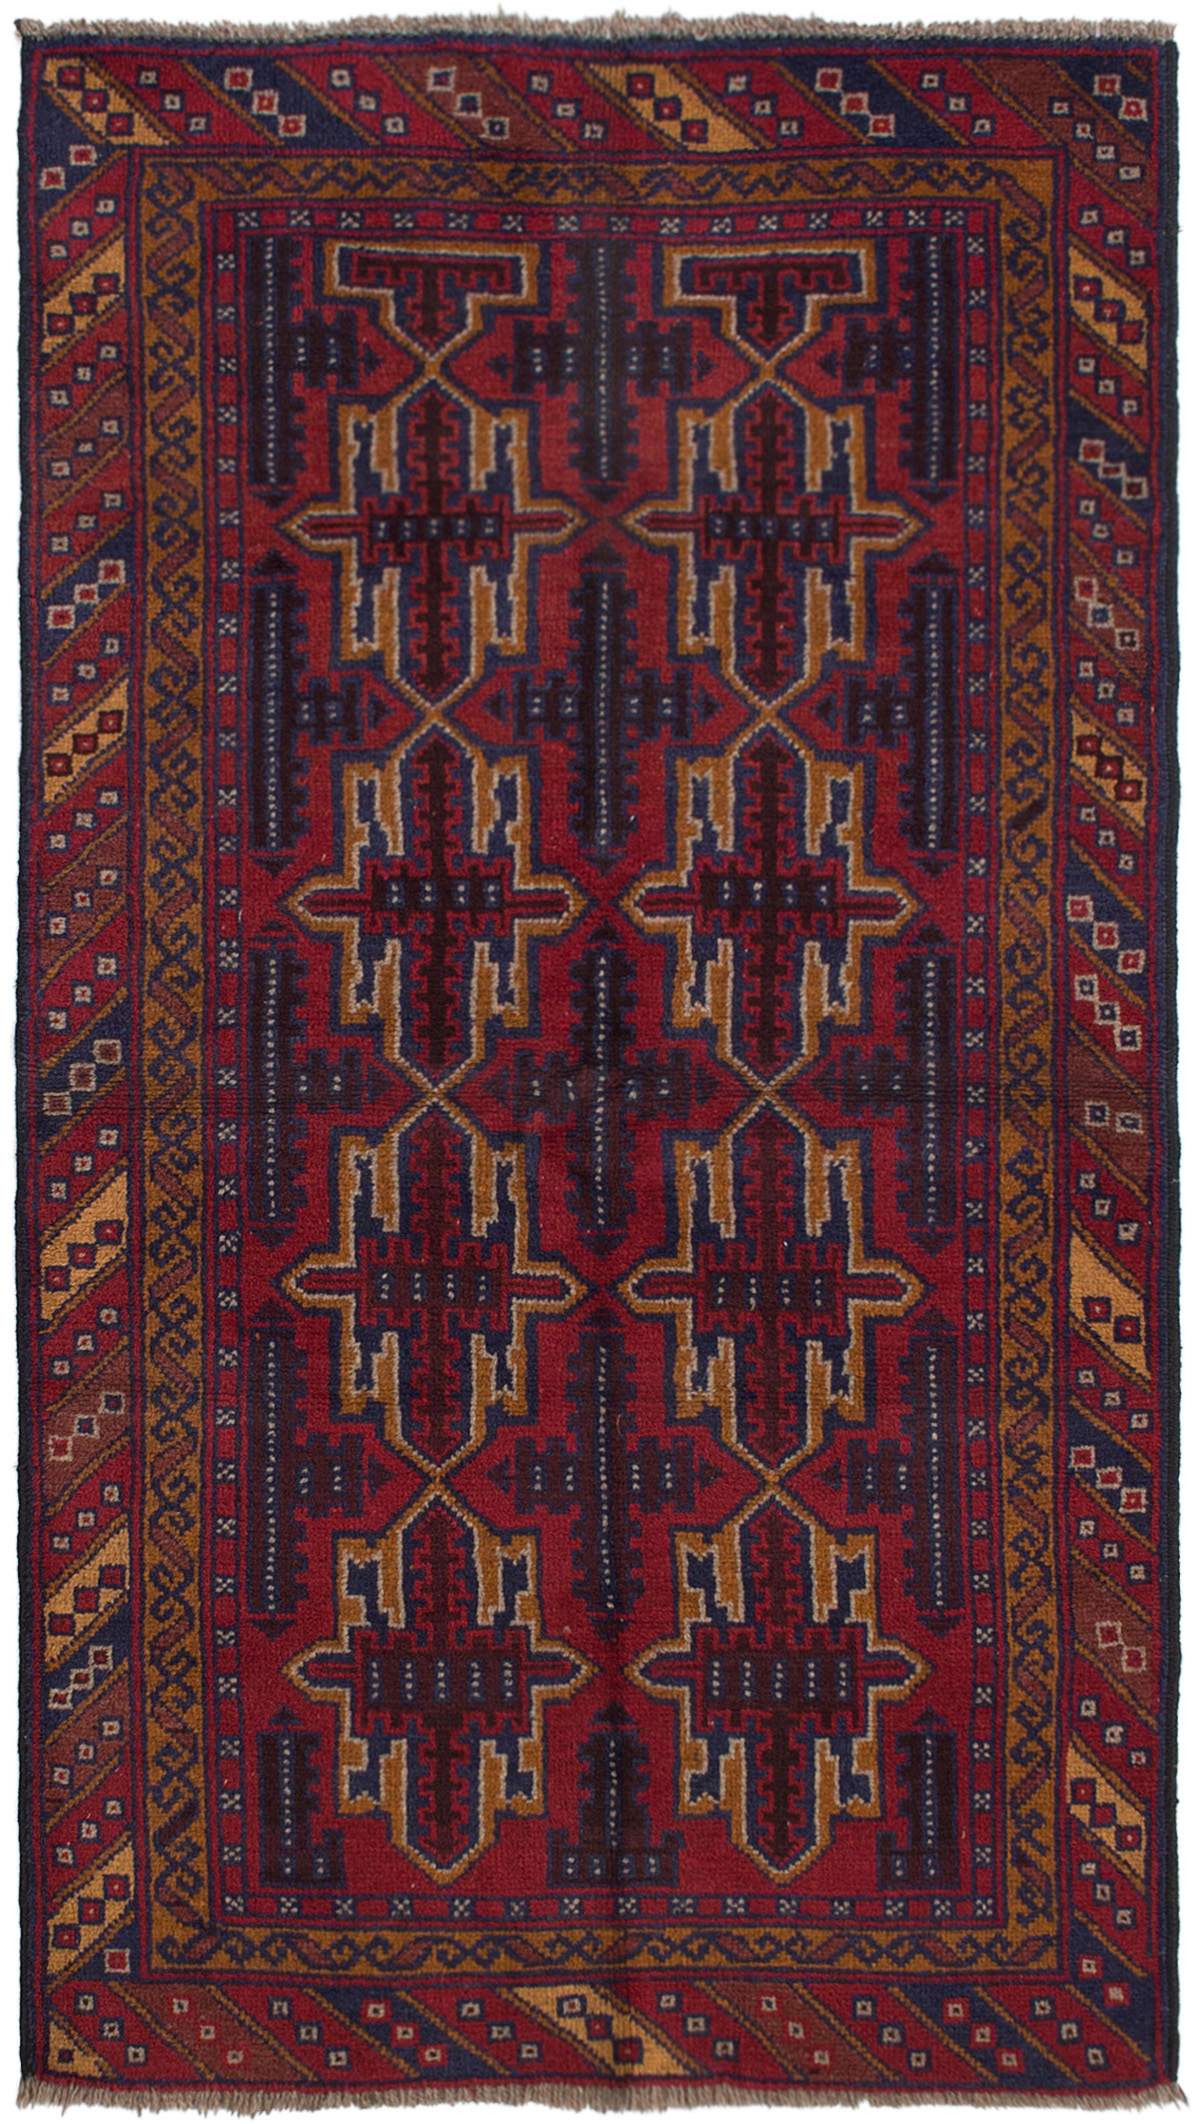 Hand-knotted Teimani Red Wool Rug 3'5" x 6'4"  Size: 3'5" x 6'4"  